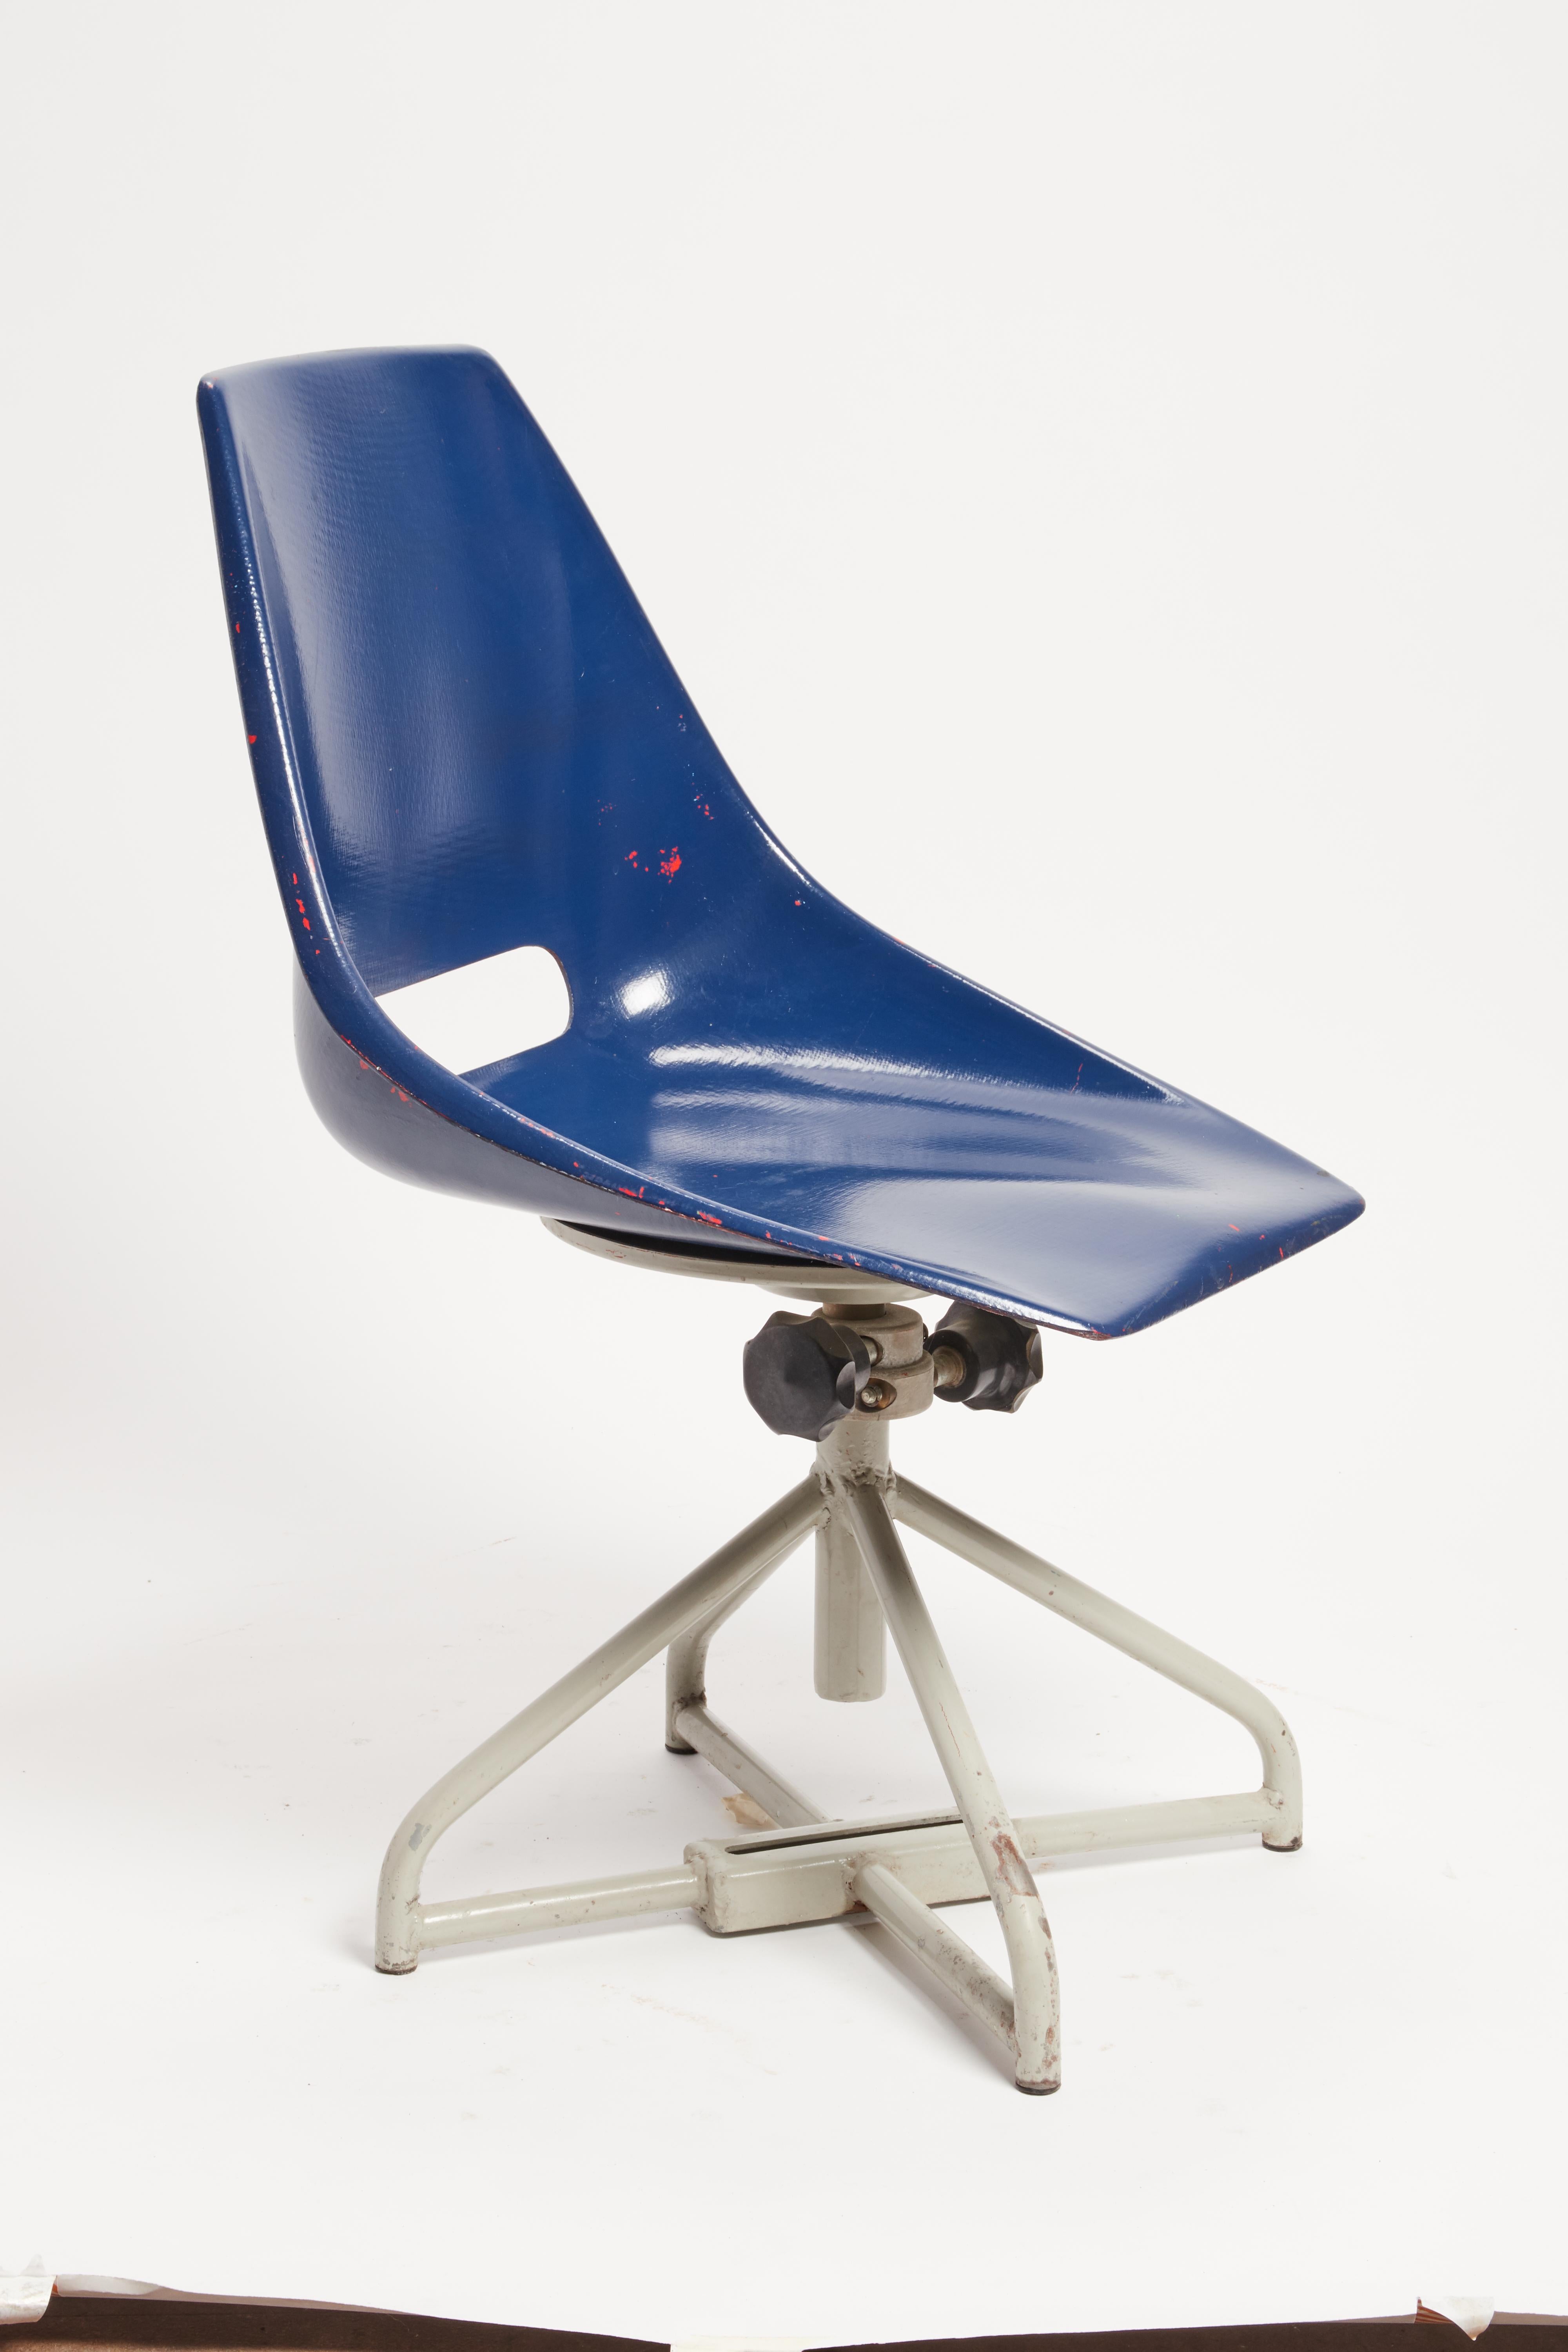 Multicolor Adjustable Fiberglass Chairs, Italy, 1950 For Sale 9